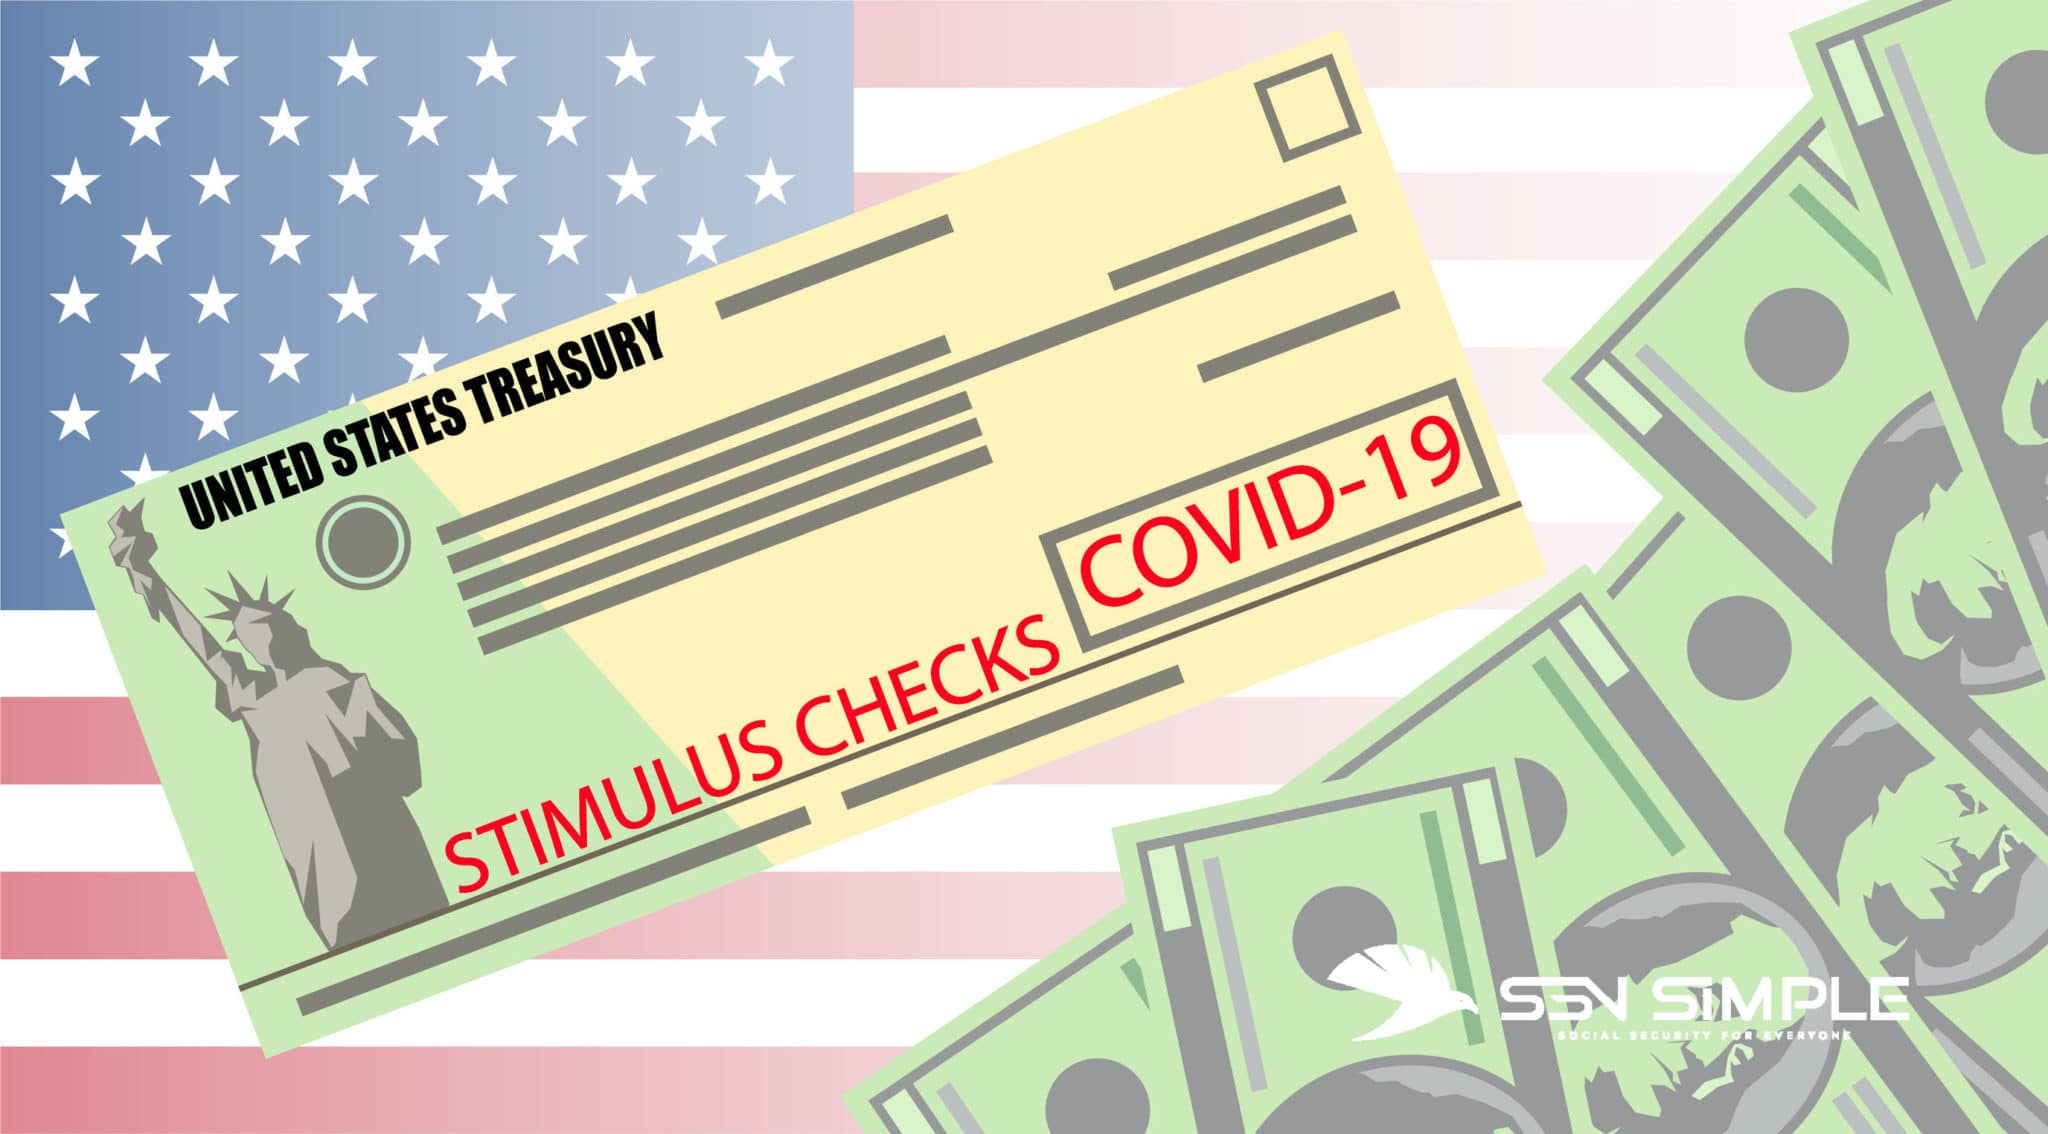 How To Get a Stimulus Check If You Receive Social Security Benefits